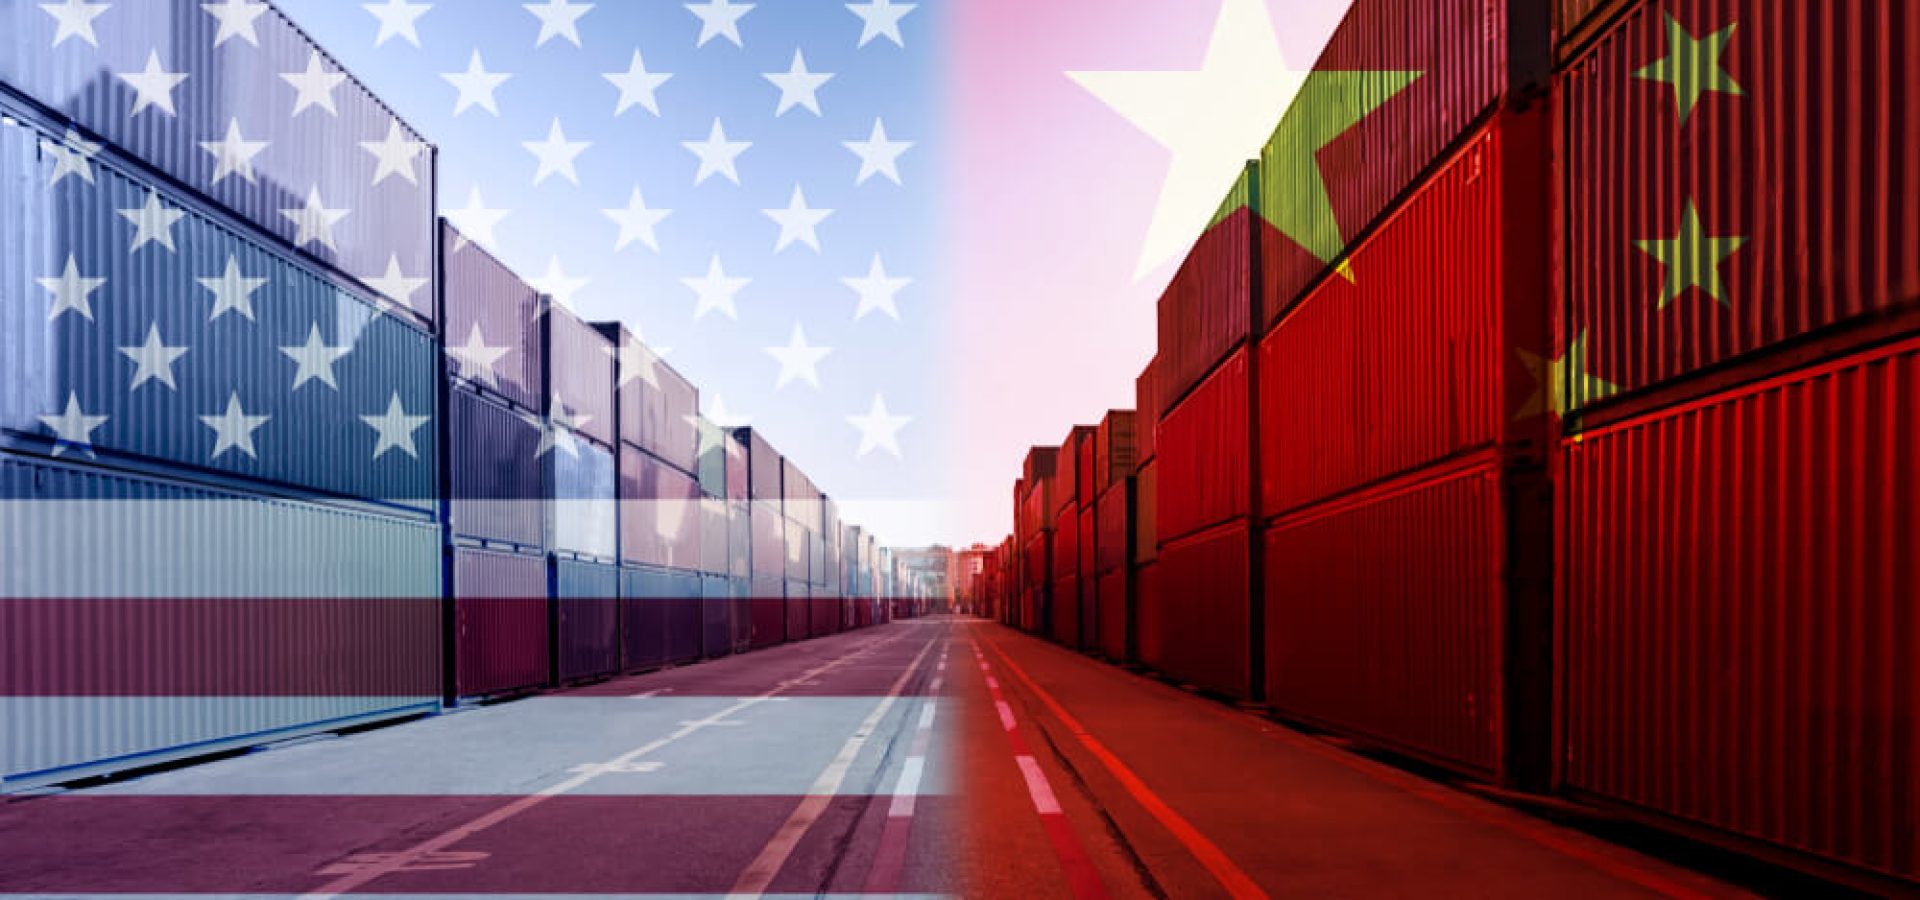 us futures: United States of America and China trade war tariffs as two opposing container cargo